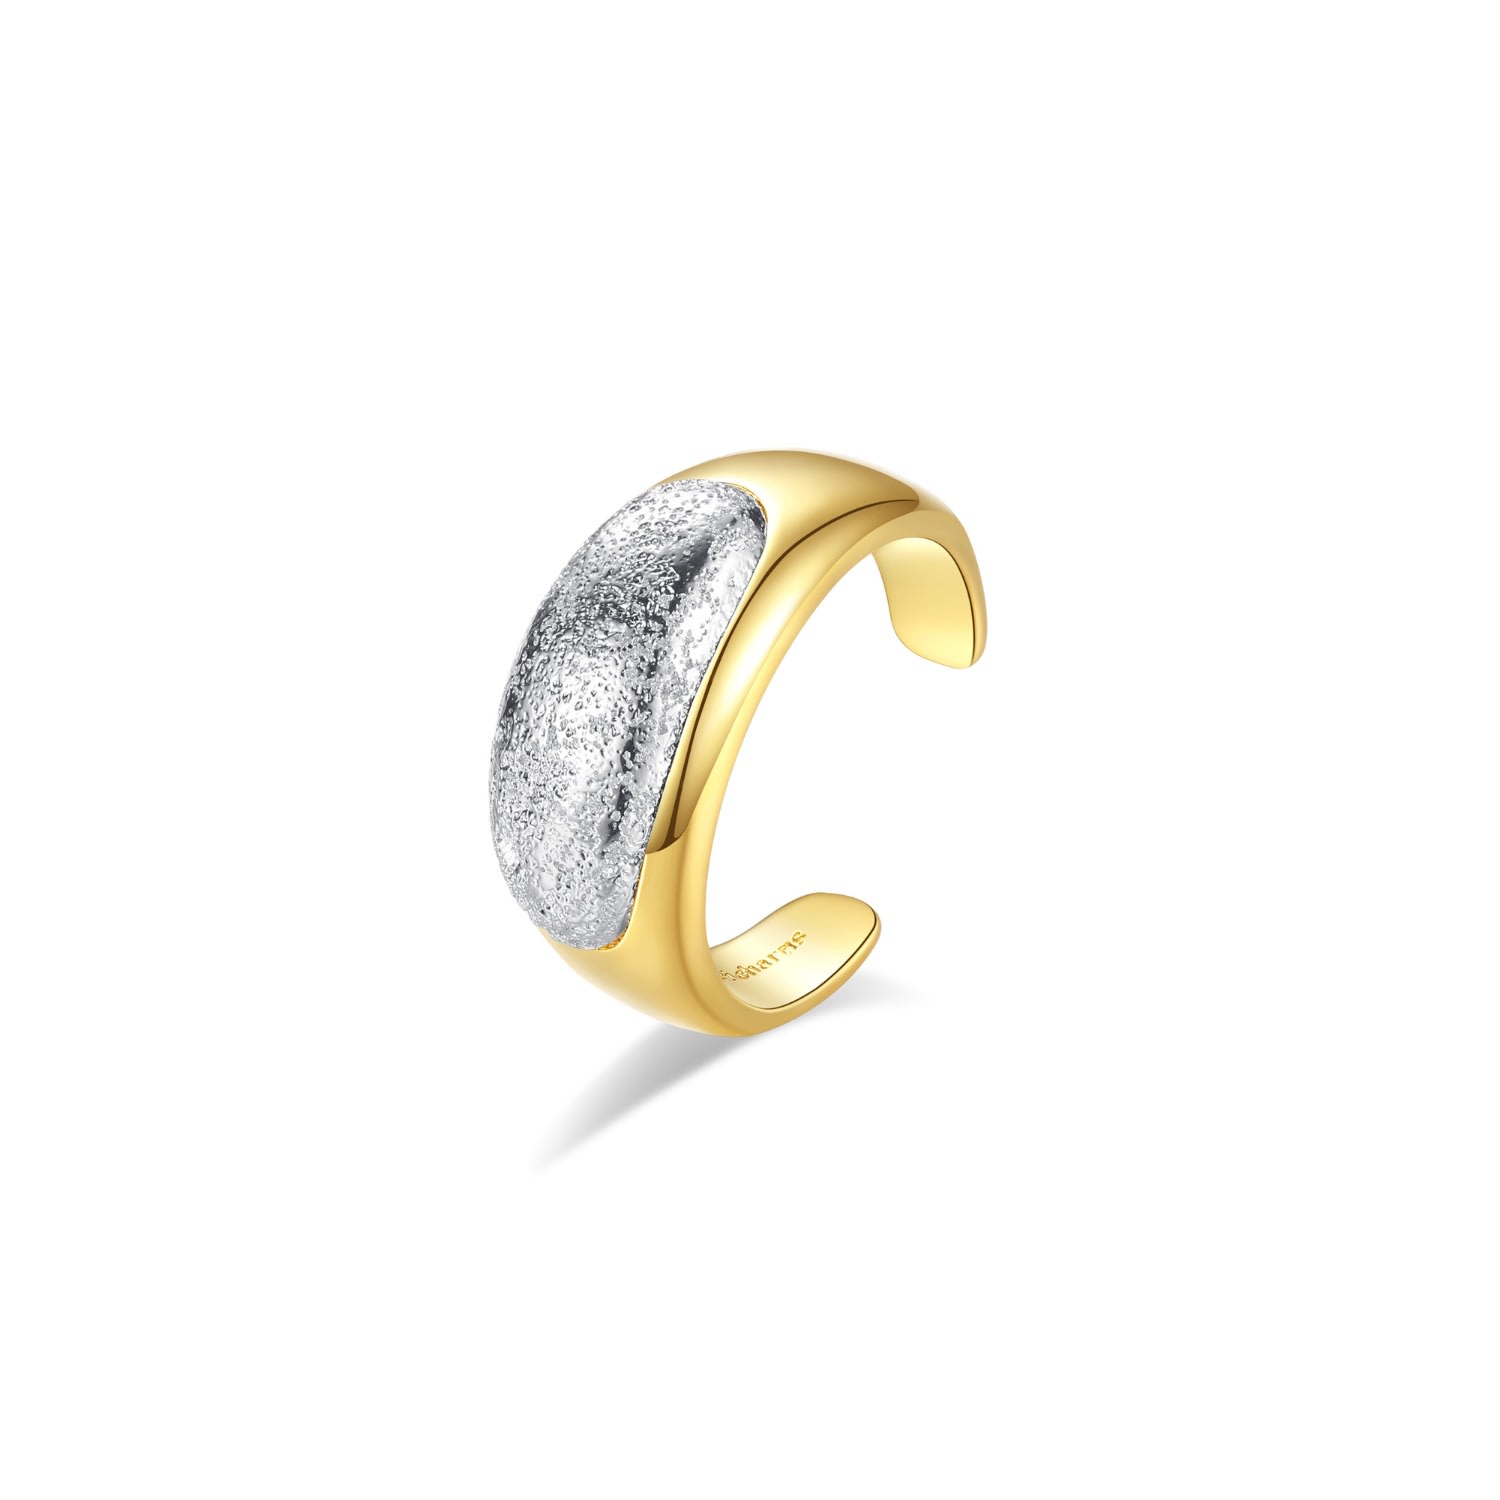 Shop Classicharms Women's Gold / Silver Frosted & Matted Texture Two-tone Ring In Gold/silver